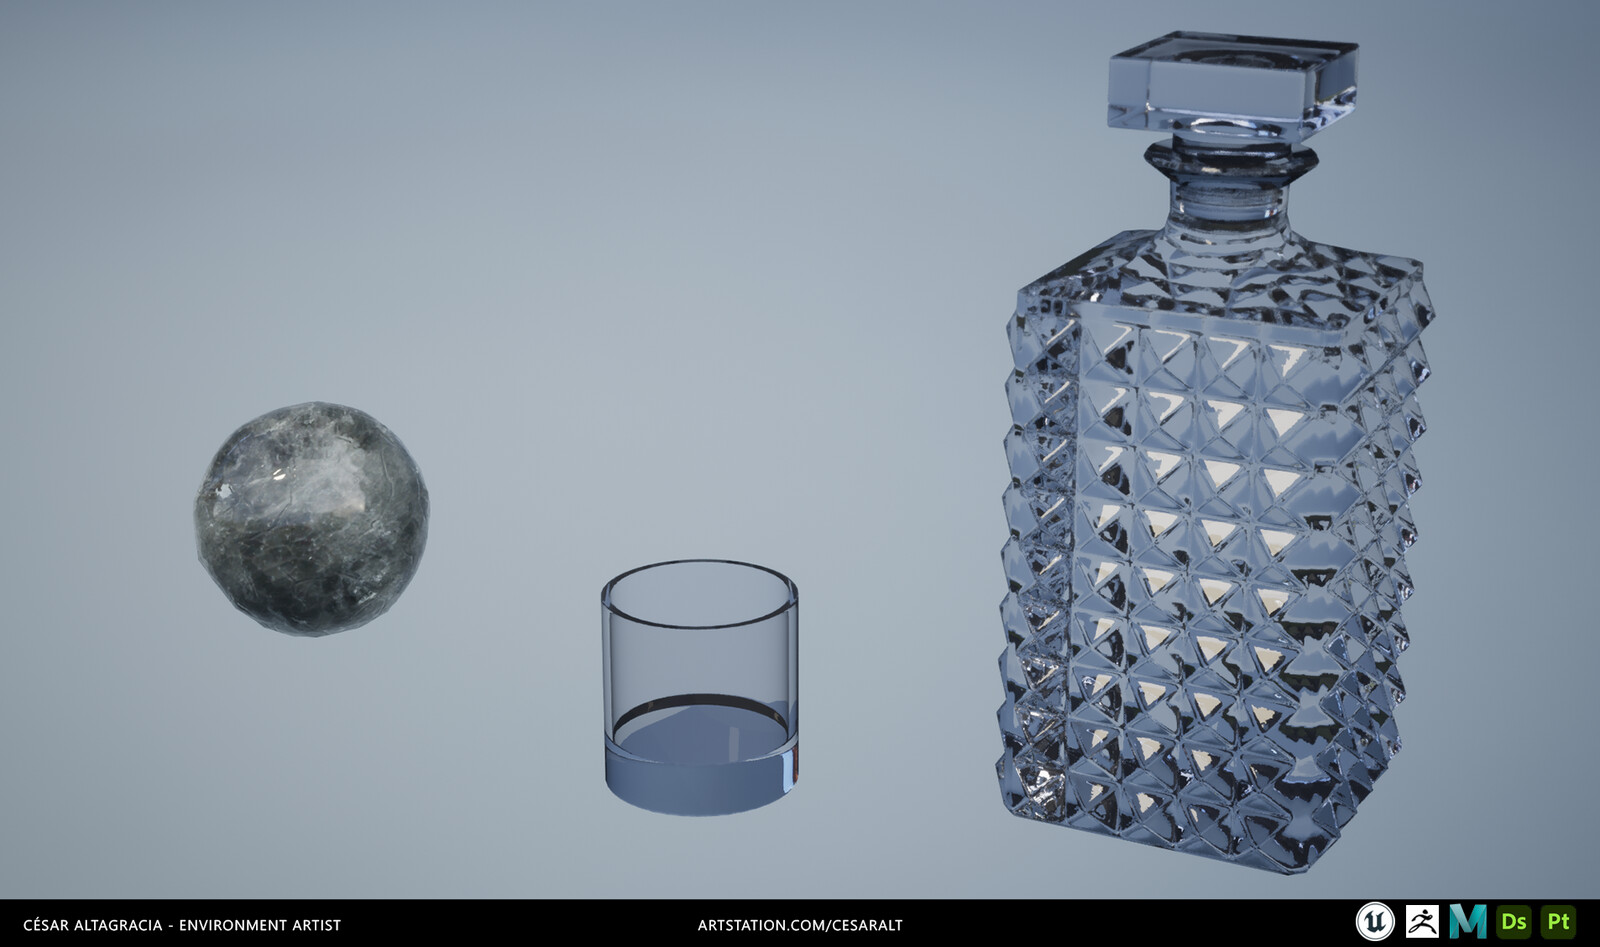 Ice ball and glass materials created for the side table, using Unreal's robust material editor.